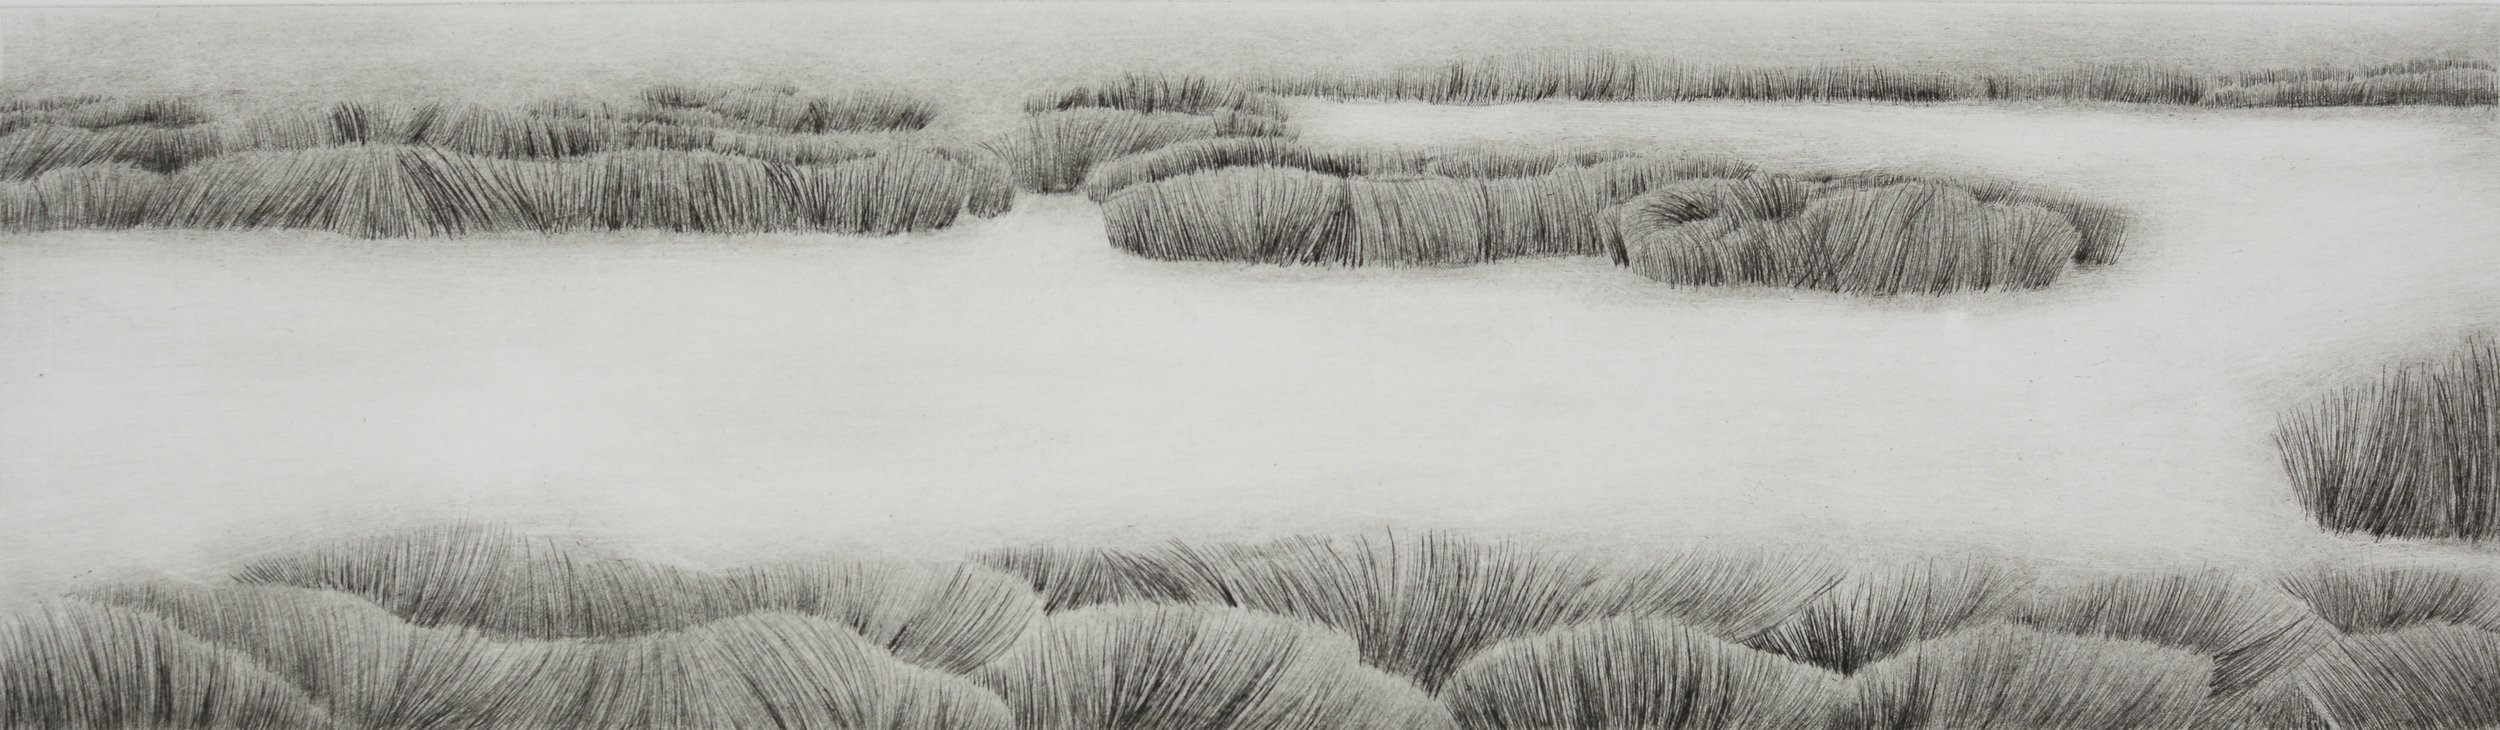  ‘Once Lay a Wetland - Kōreti I’   Drypoint. Ink on Hahnemuhle 300gsm Paper Image: 151 x 520mm Paper: 295 x 640mm  Kyla Cresswell, 2023  Held in the collection of The Southland Museum and Art Gallery, NZ  Selected for The Director’s Cut, Woolwich Con